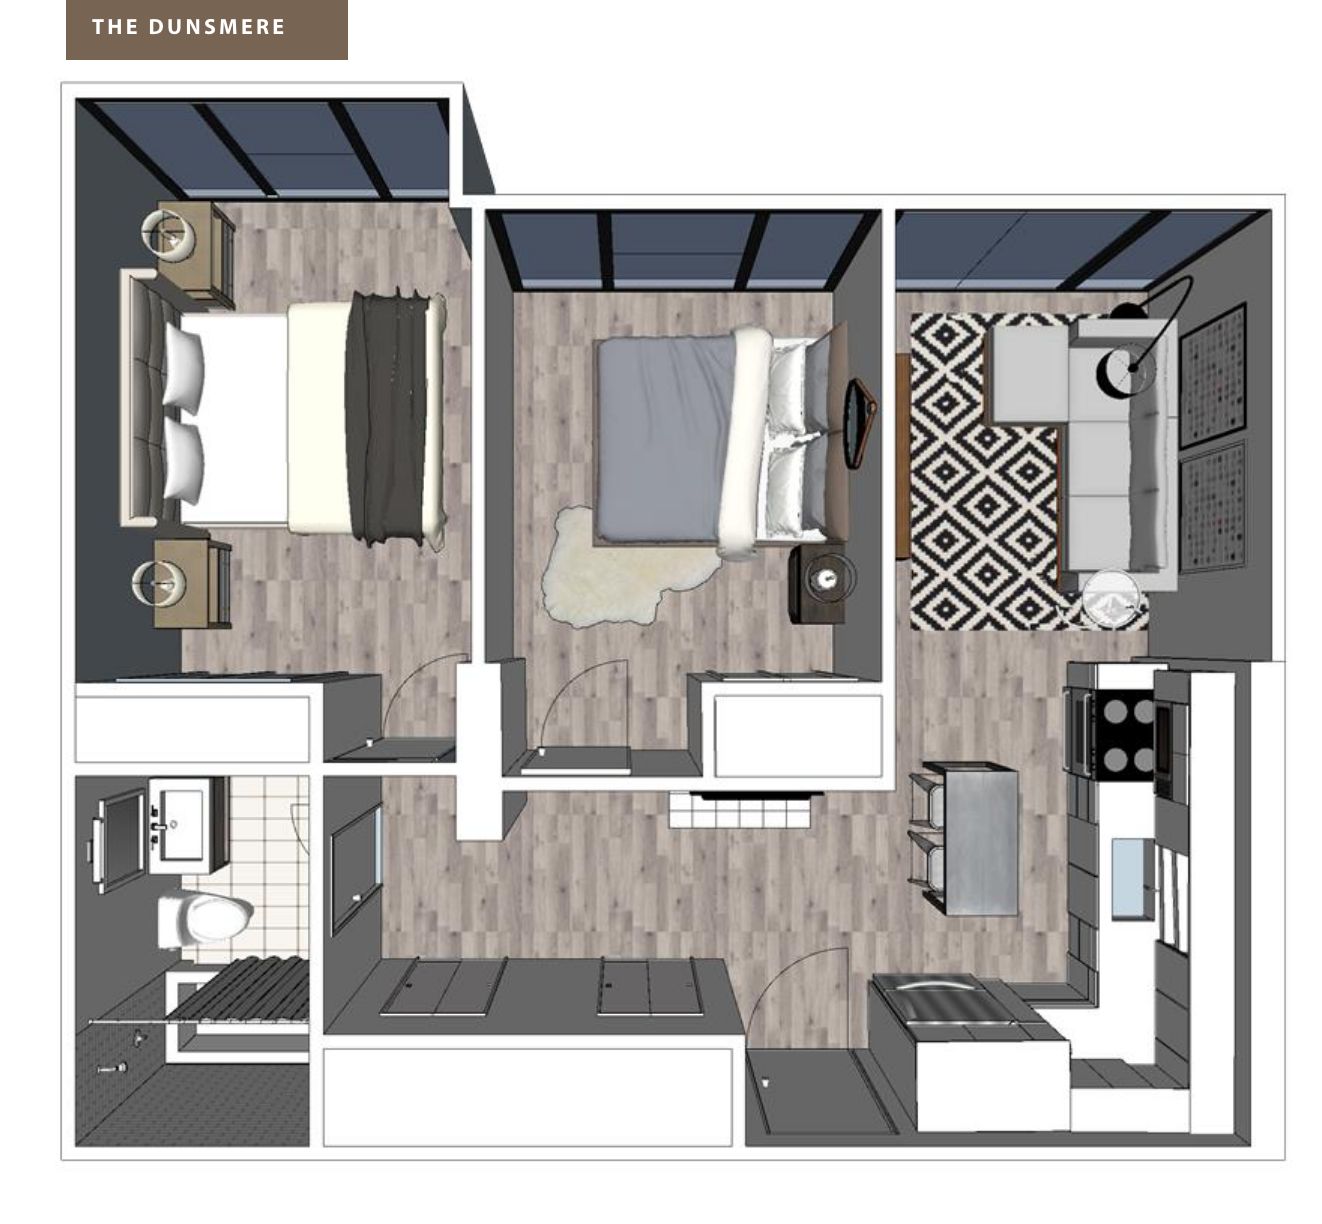 Coloured preview of the Dunsmere Suite Floor Plan at the Woodside Spadina Suites